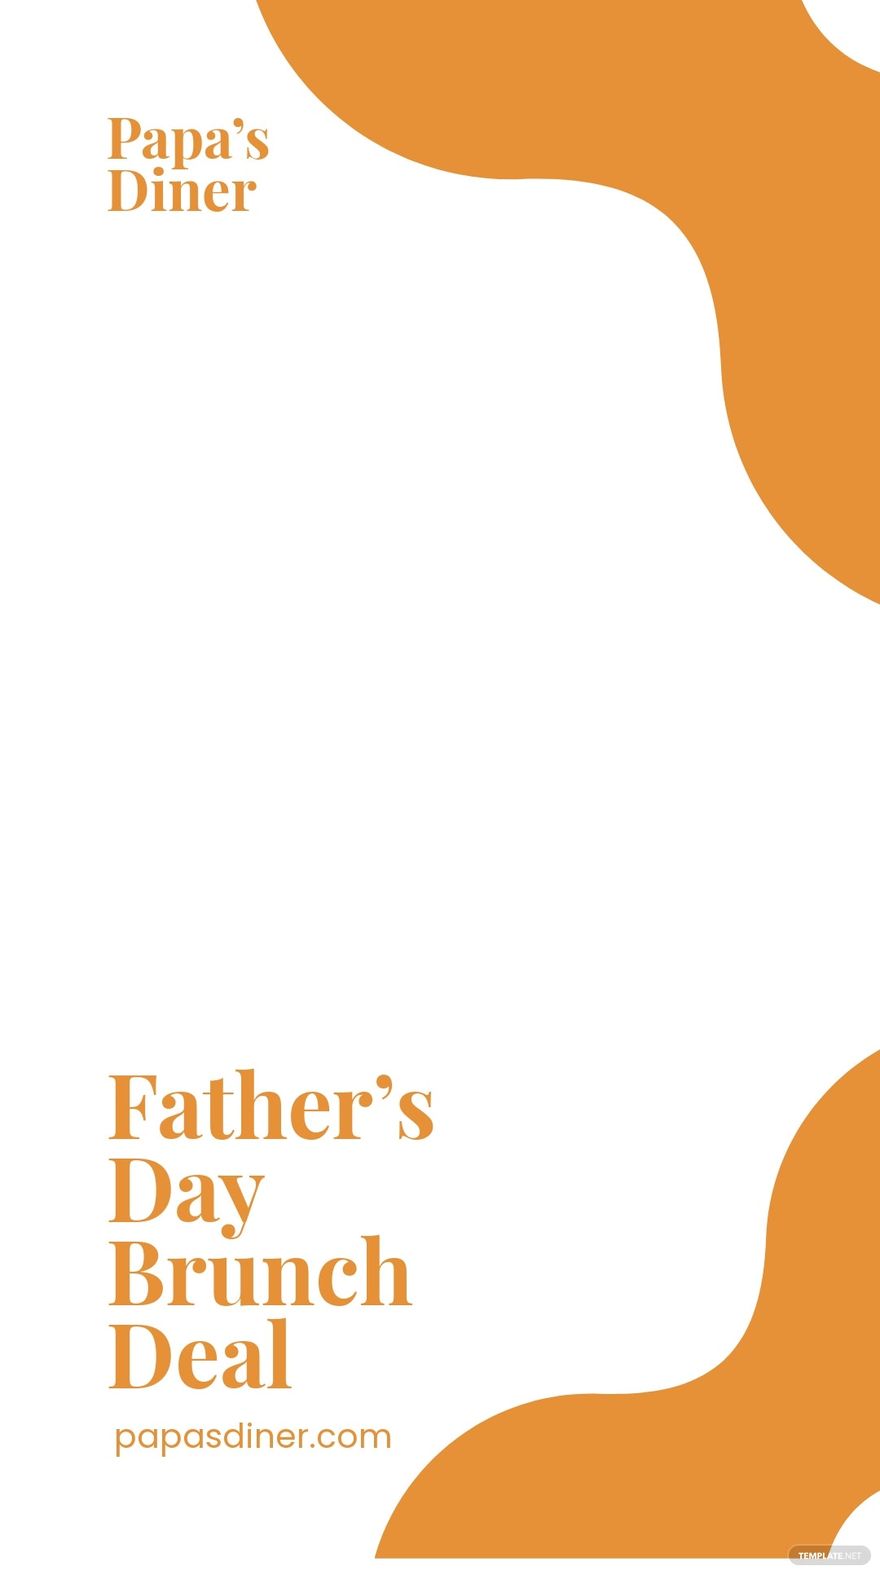 Free Father's Day Brunch Deal Snapchat Geofilter Template